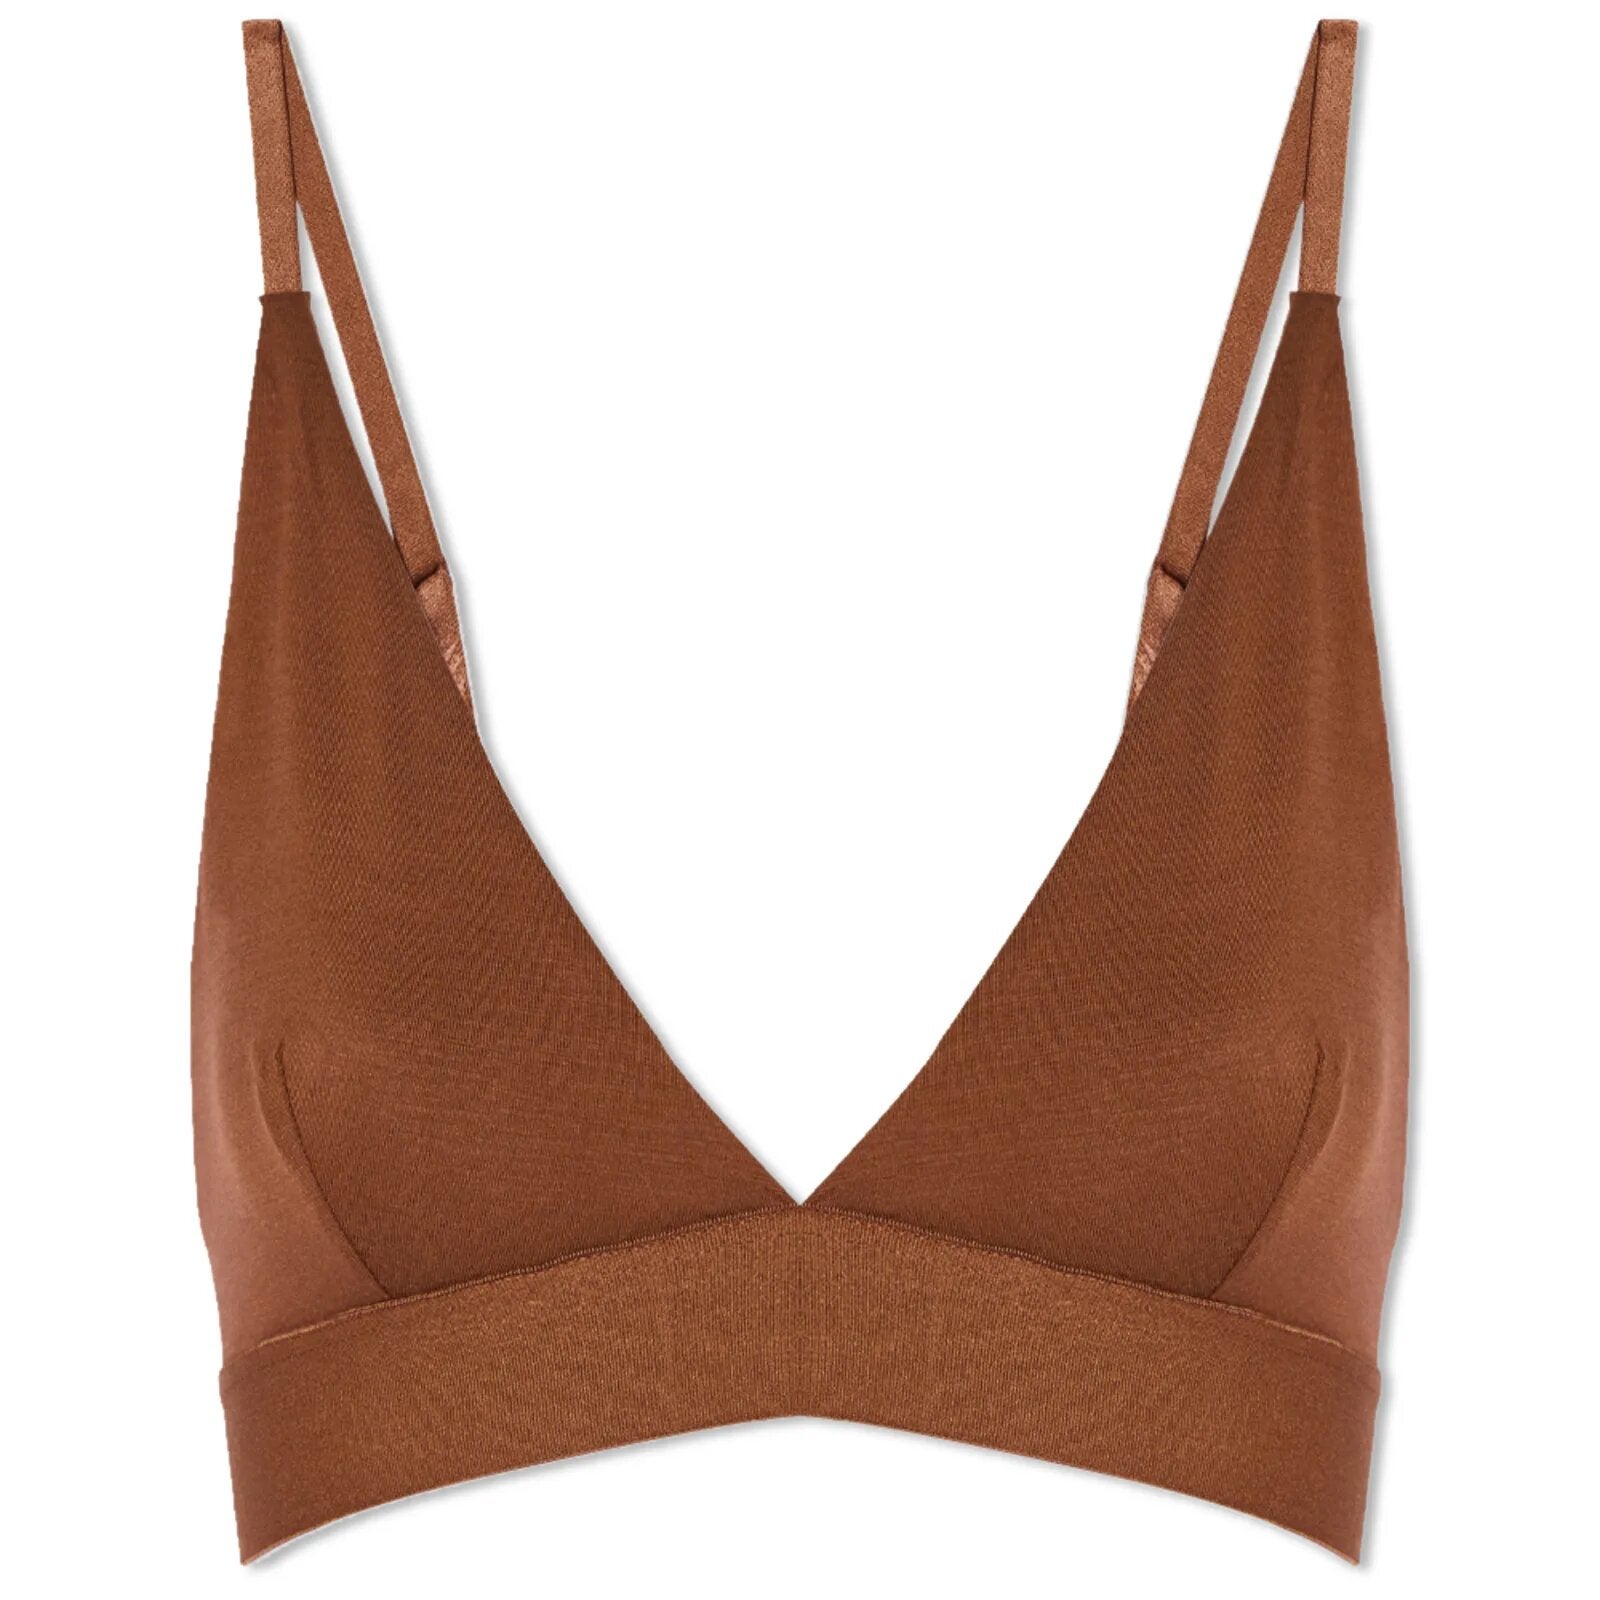 Best Bralettes For Small, Medium, Big Boobs & Plus Size